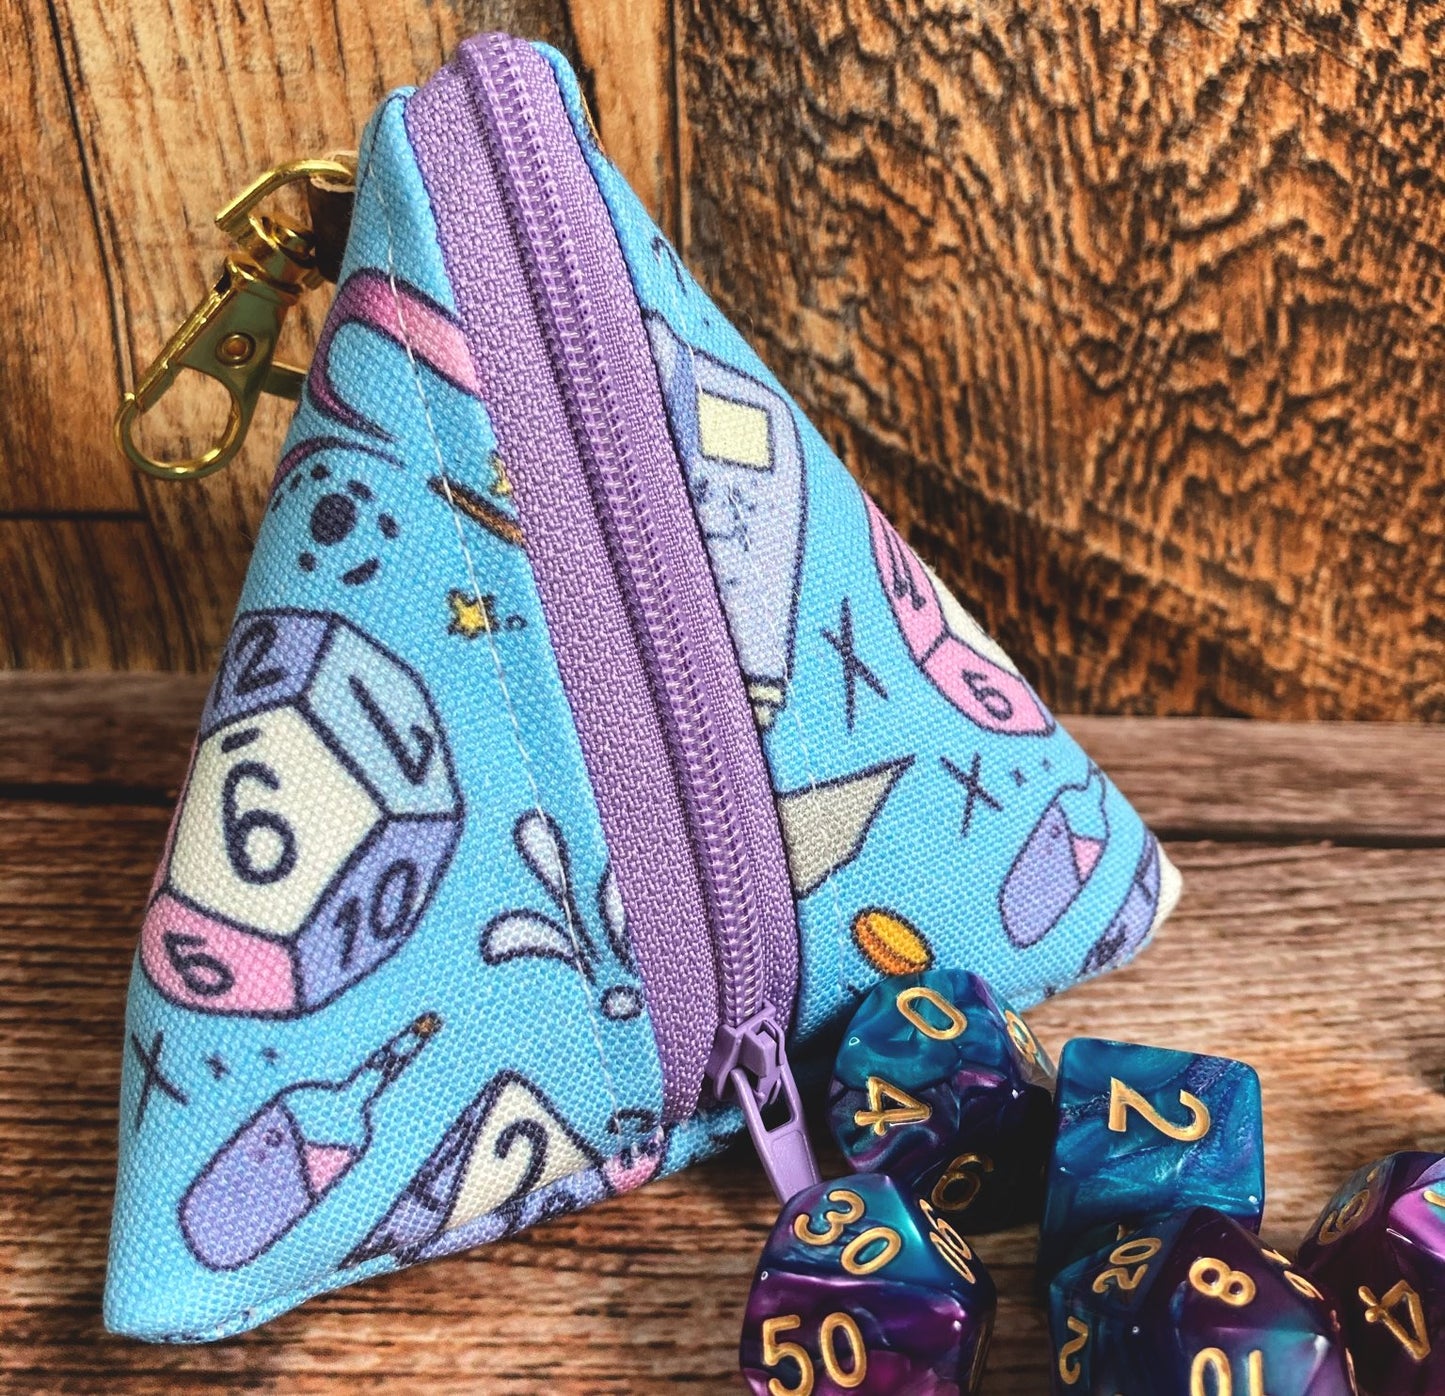 Copy of 4 Sided Pyramid Dice and Trinket Bag